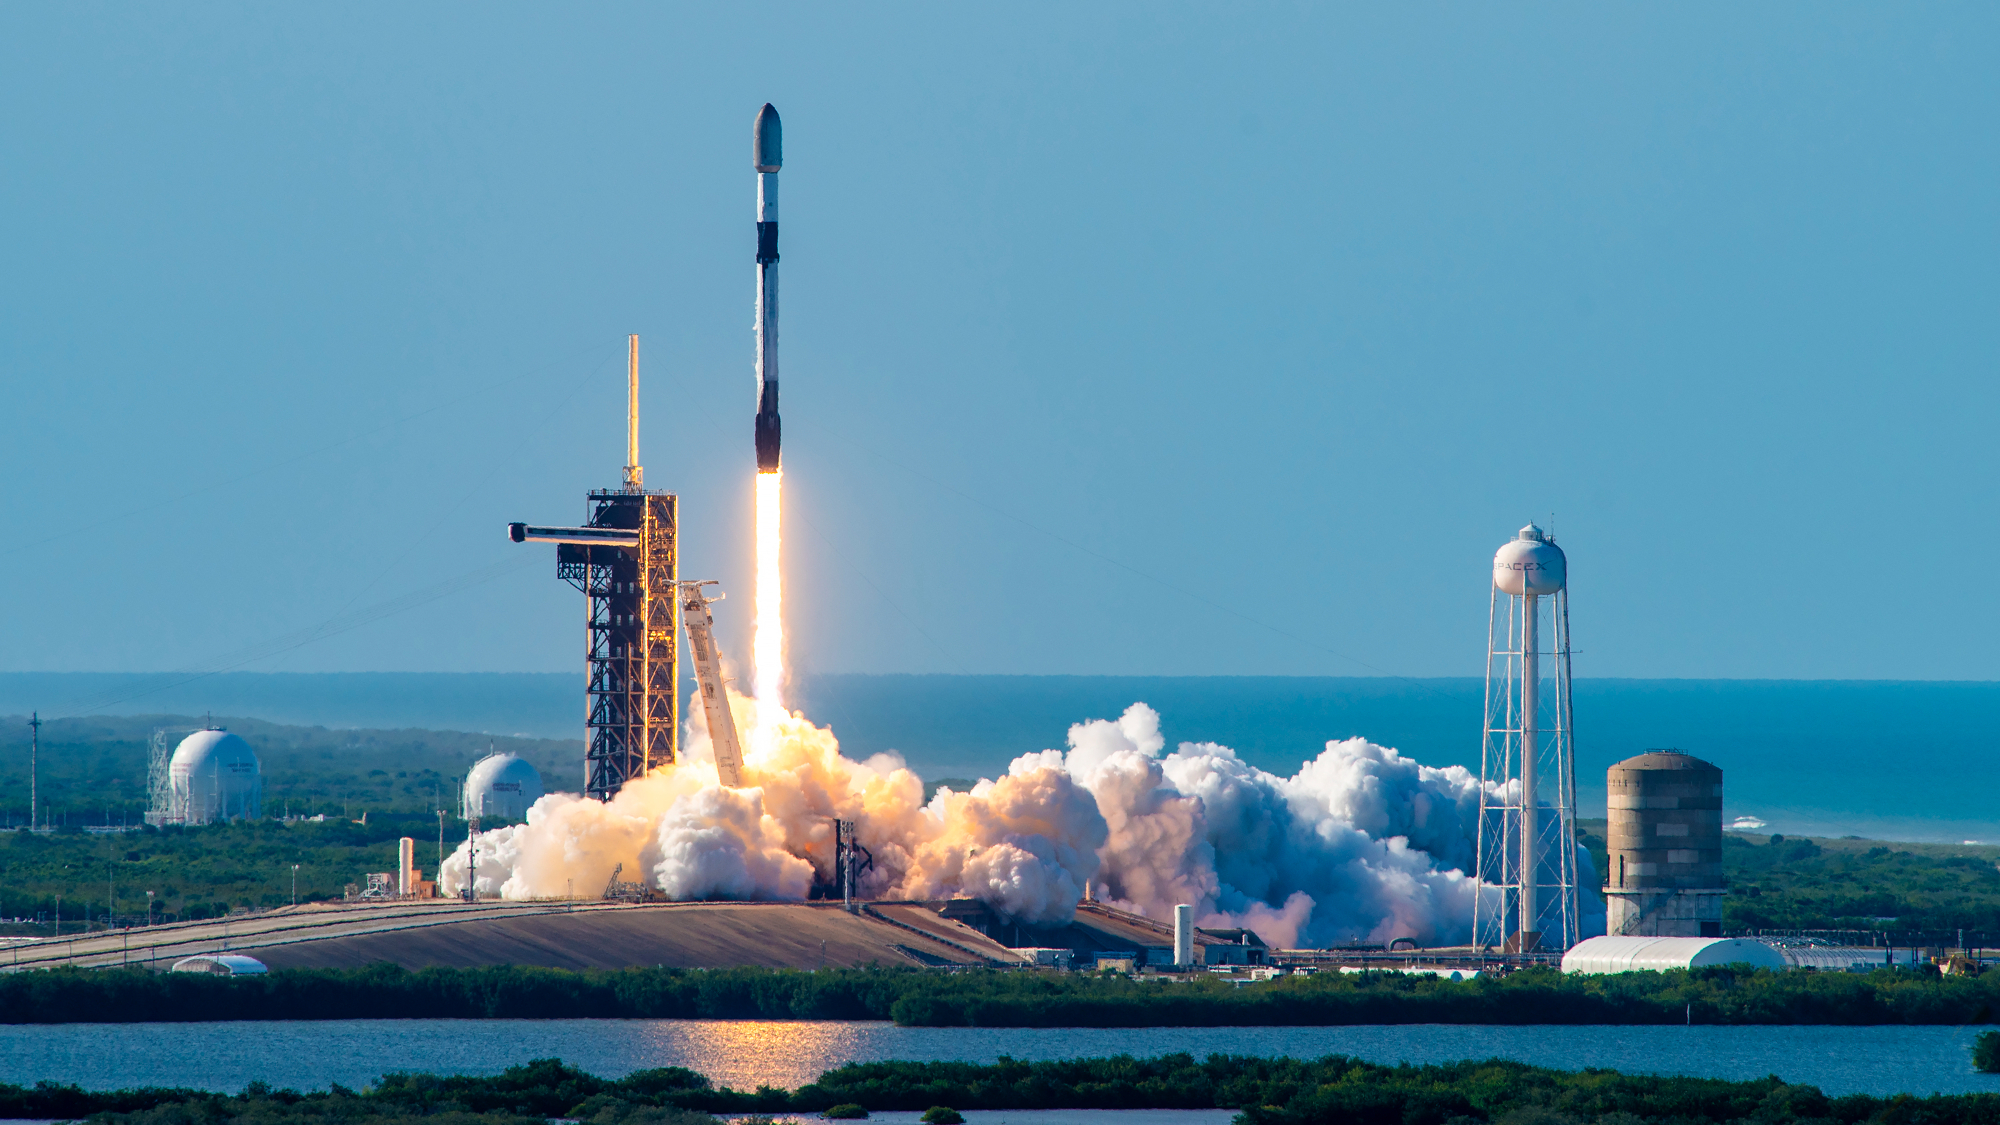 SpaceX Falcon 9 rocket launching 2 satellites on record-tying 20th flight today